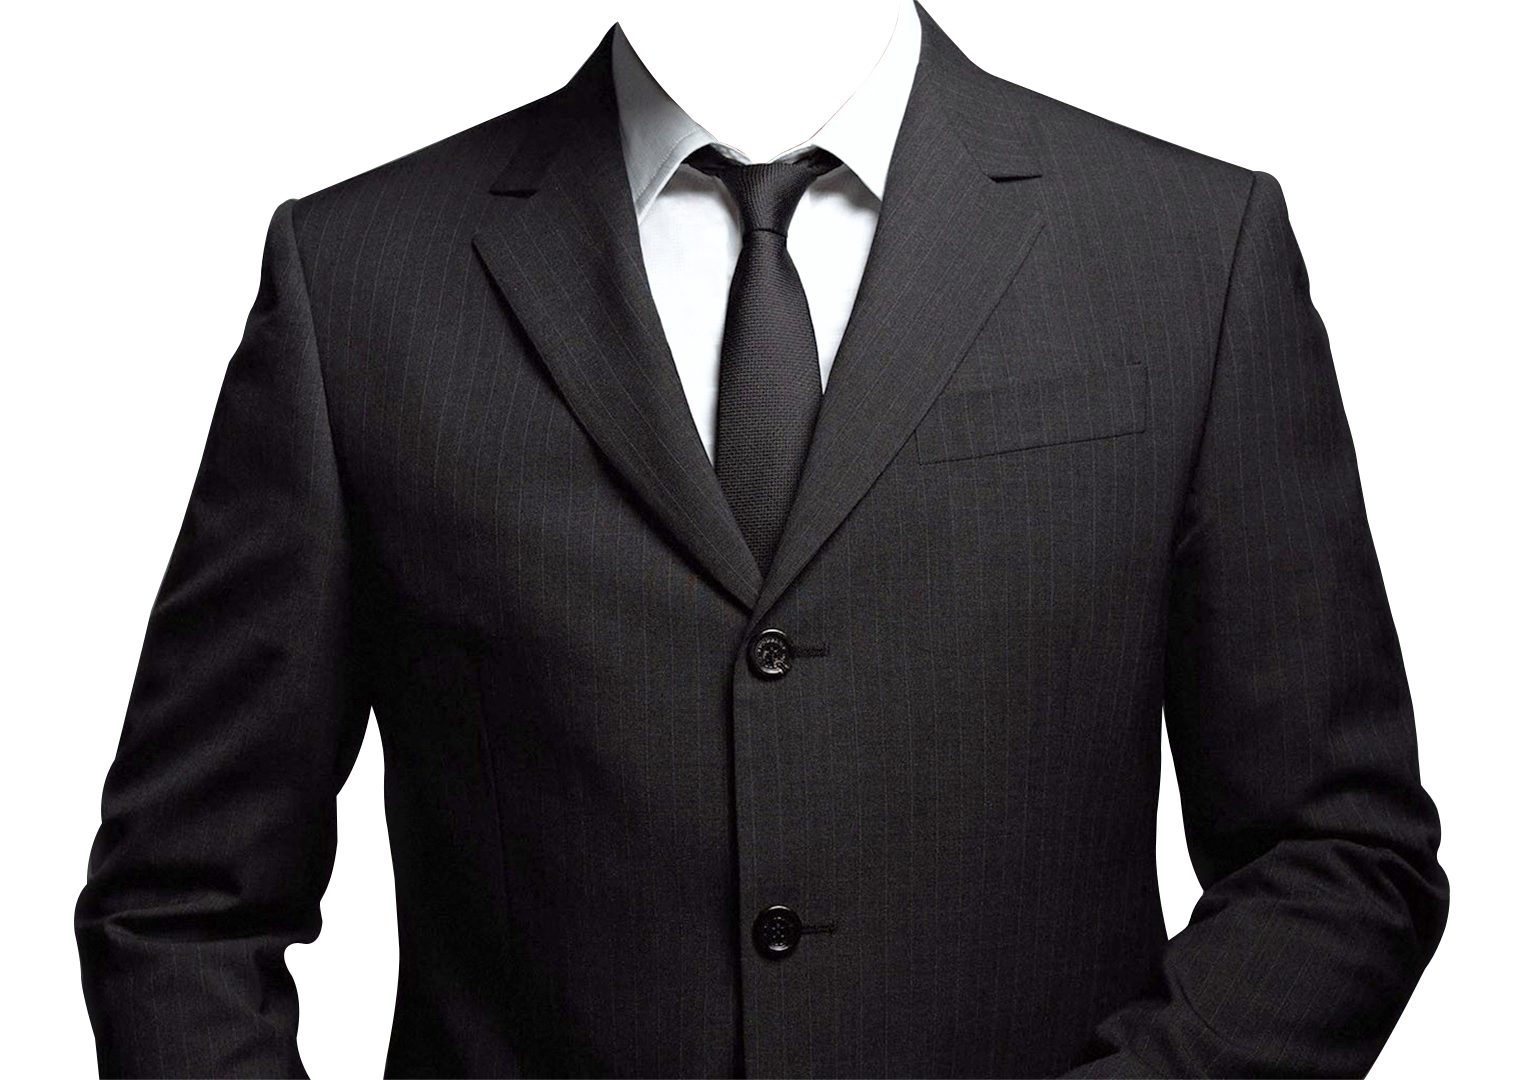 A Person Wearing A Suit And Tie